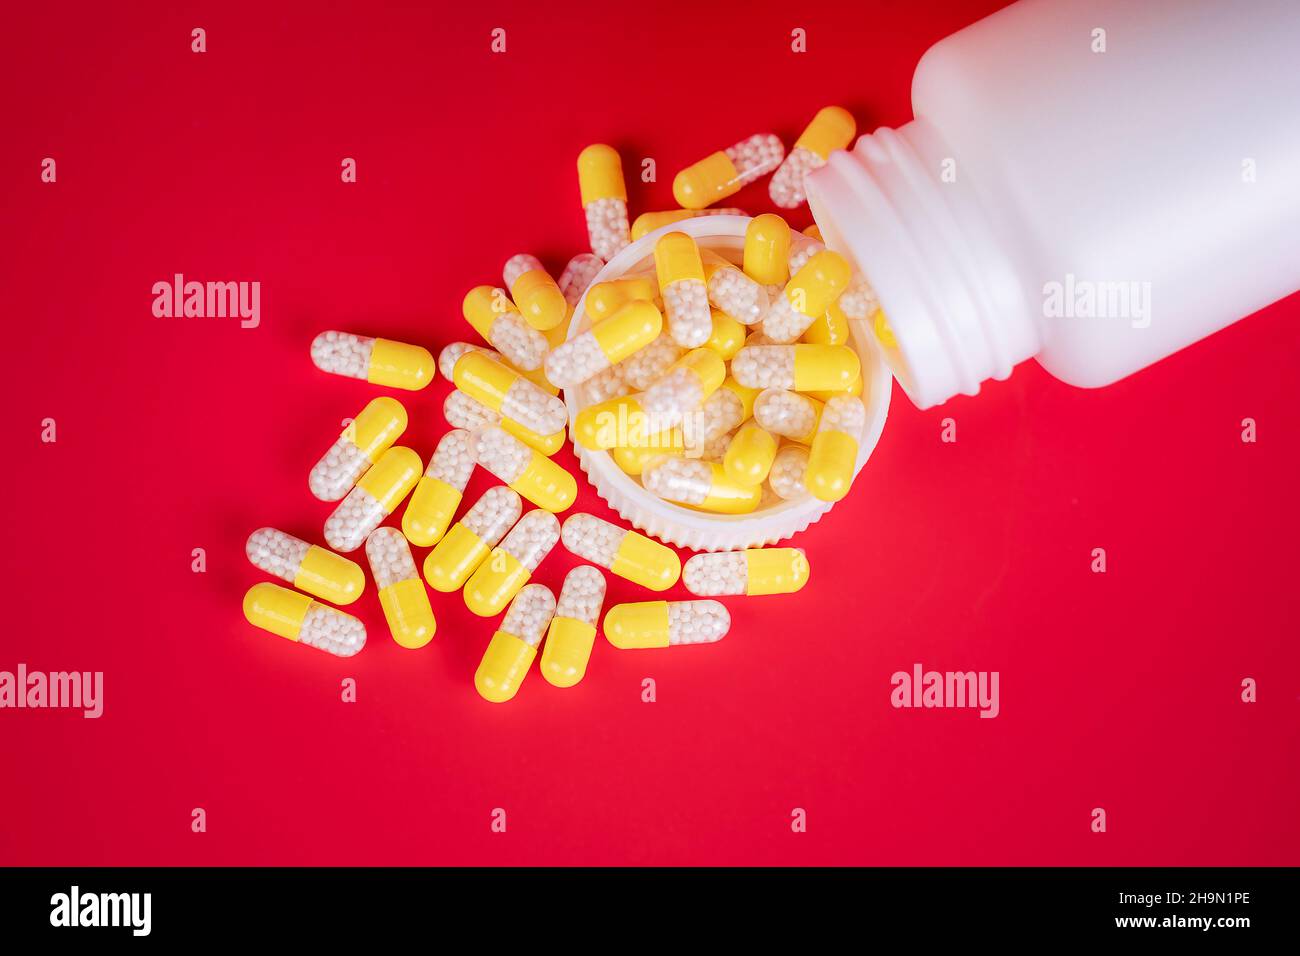 Medicine concept. Yellow capsules scattered from prescription bottle. Background is red color, with space for writing. Studio photo. Stock Photo